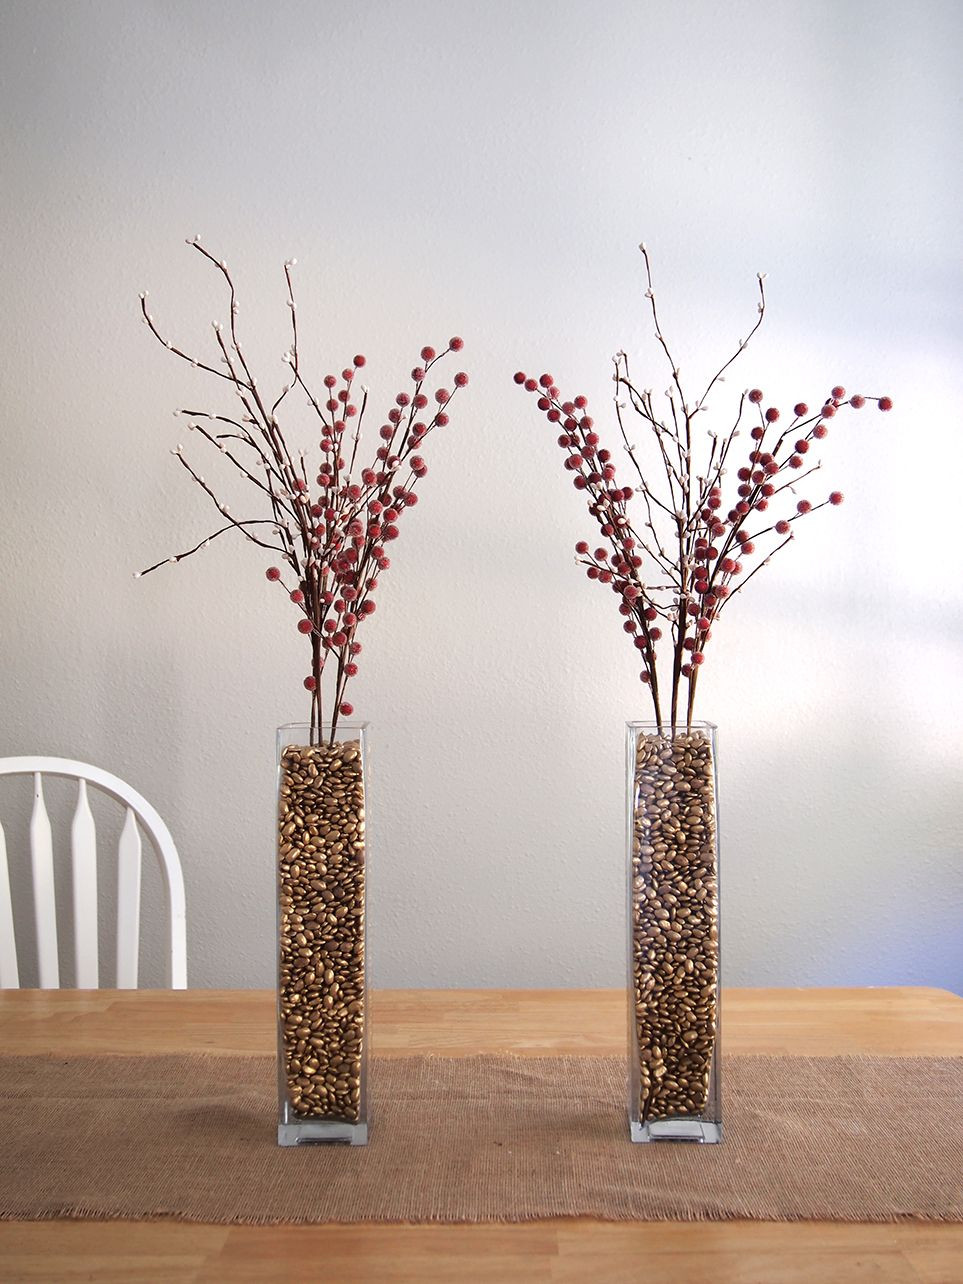 16 Popular Vase Fillers for Wedding Centerpieces 2024 free download vase fillers for wedding centerpieces of spray painted pinto beans used for vase filler great idea great with regard to spray painted pinto beans used for vase filler great idea